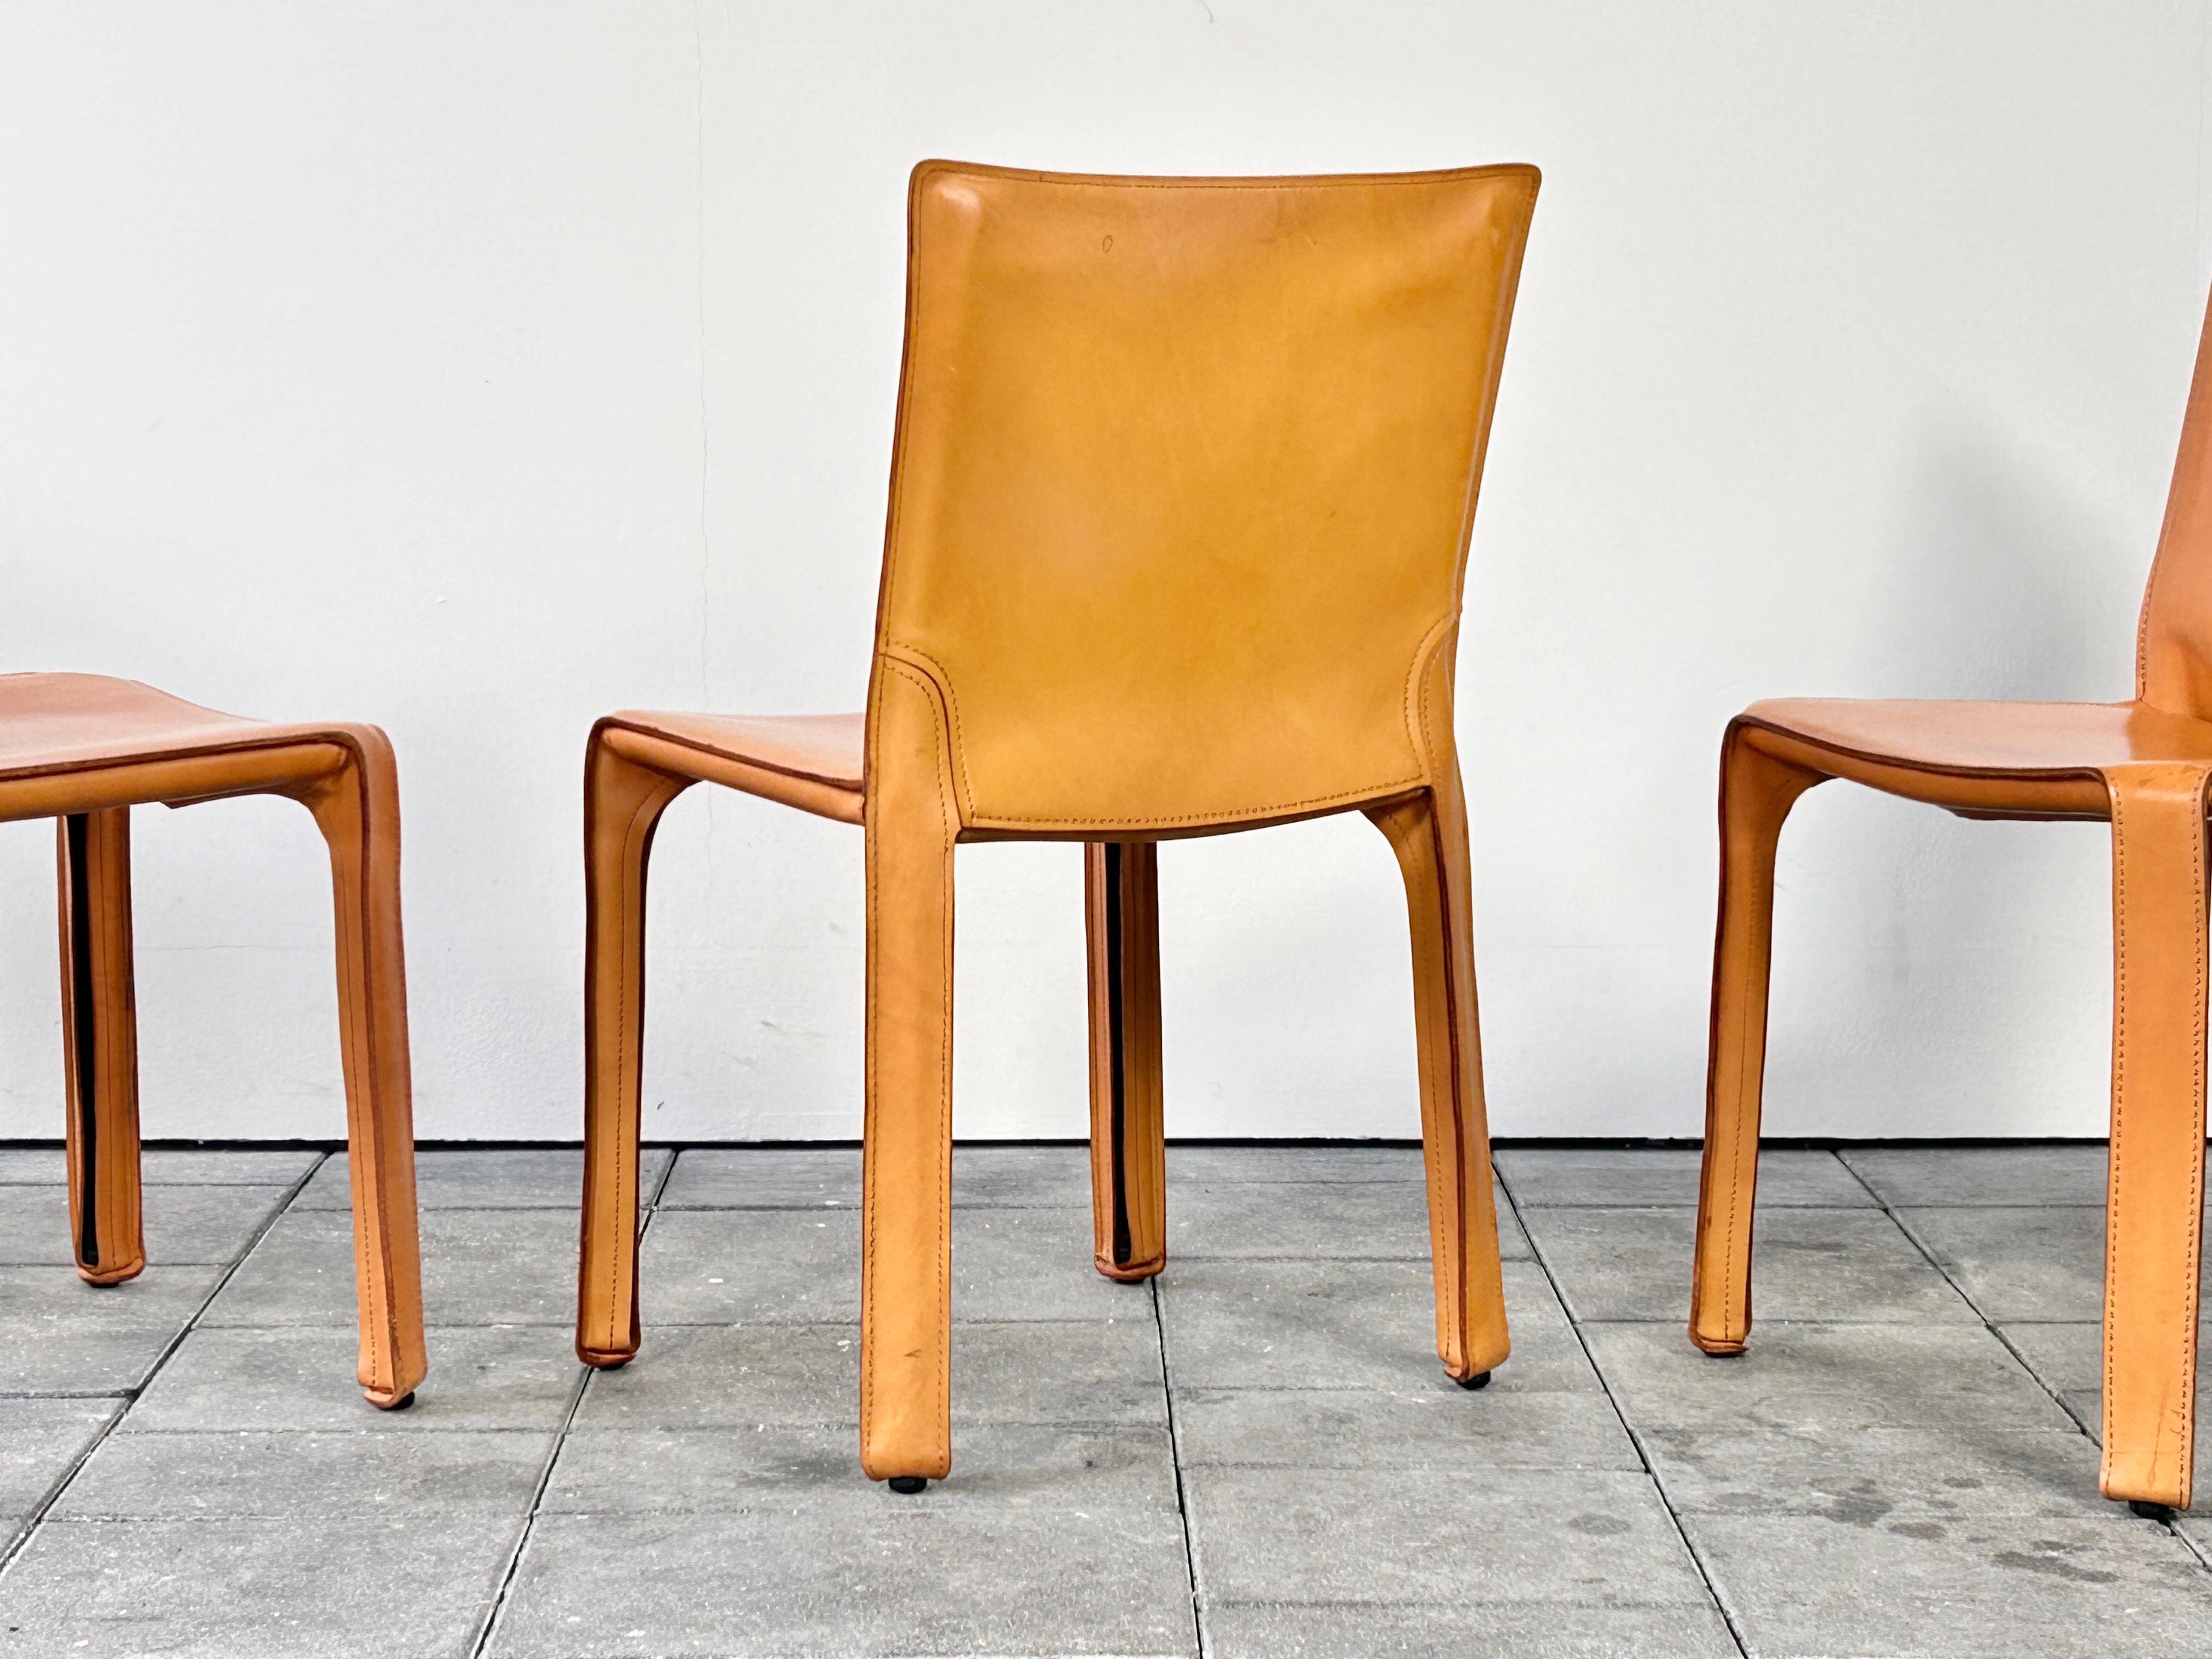 Late 20th Century Set of 4 Cassina Cab Chairs designed by Mario Bellini 1978 in Natural Leather